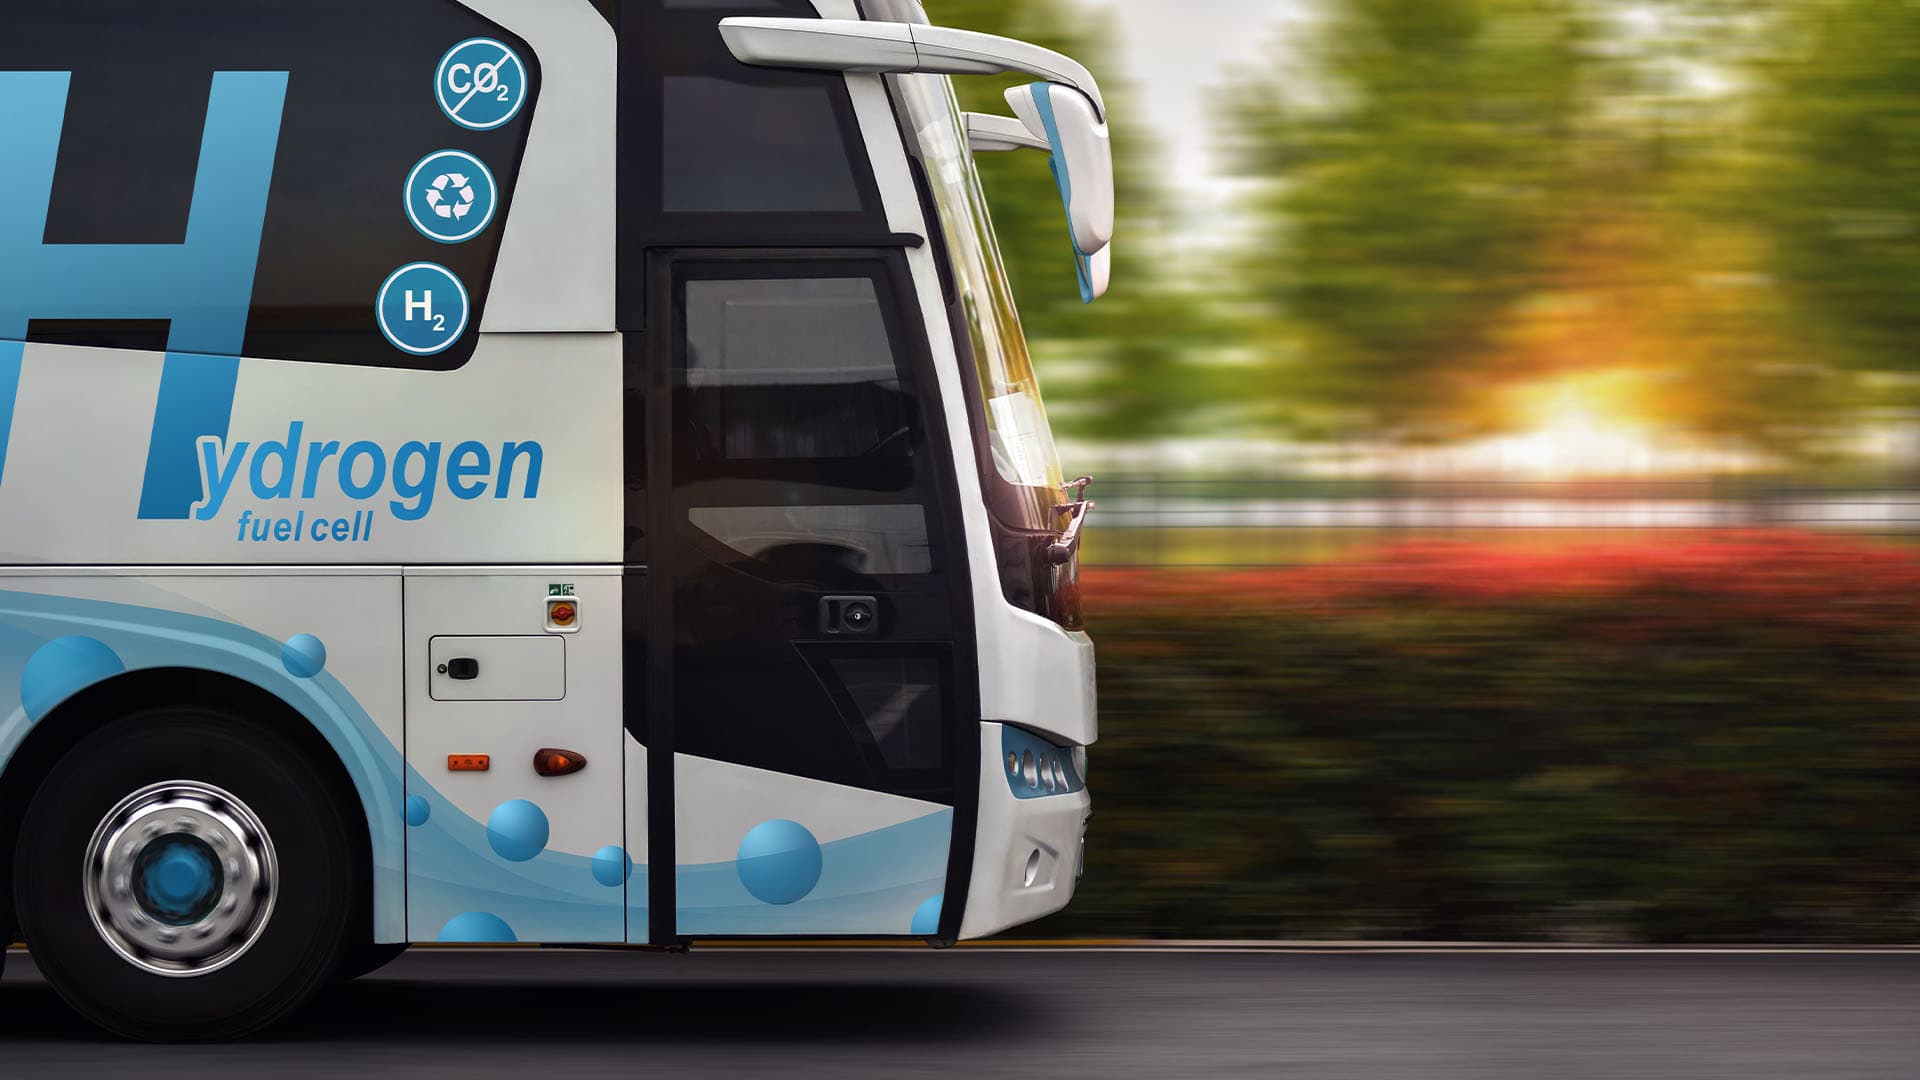 Green hydrogen could power buses like this